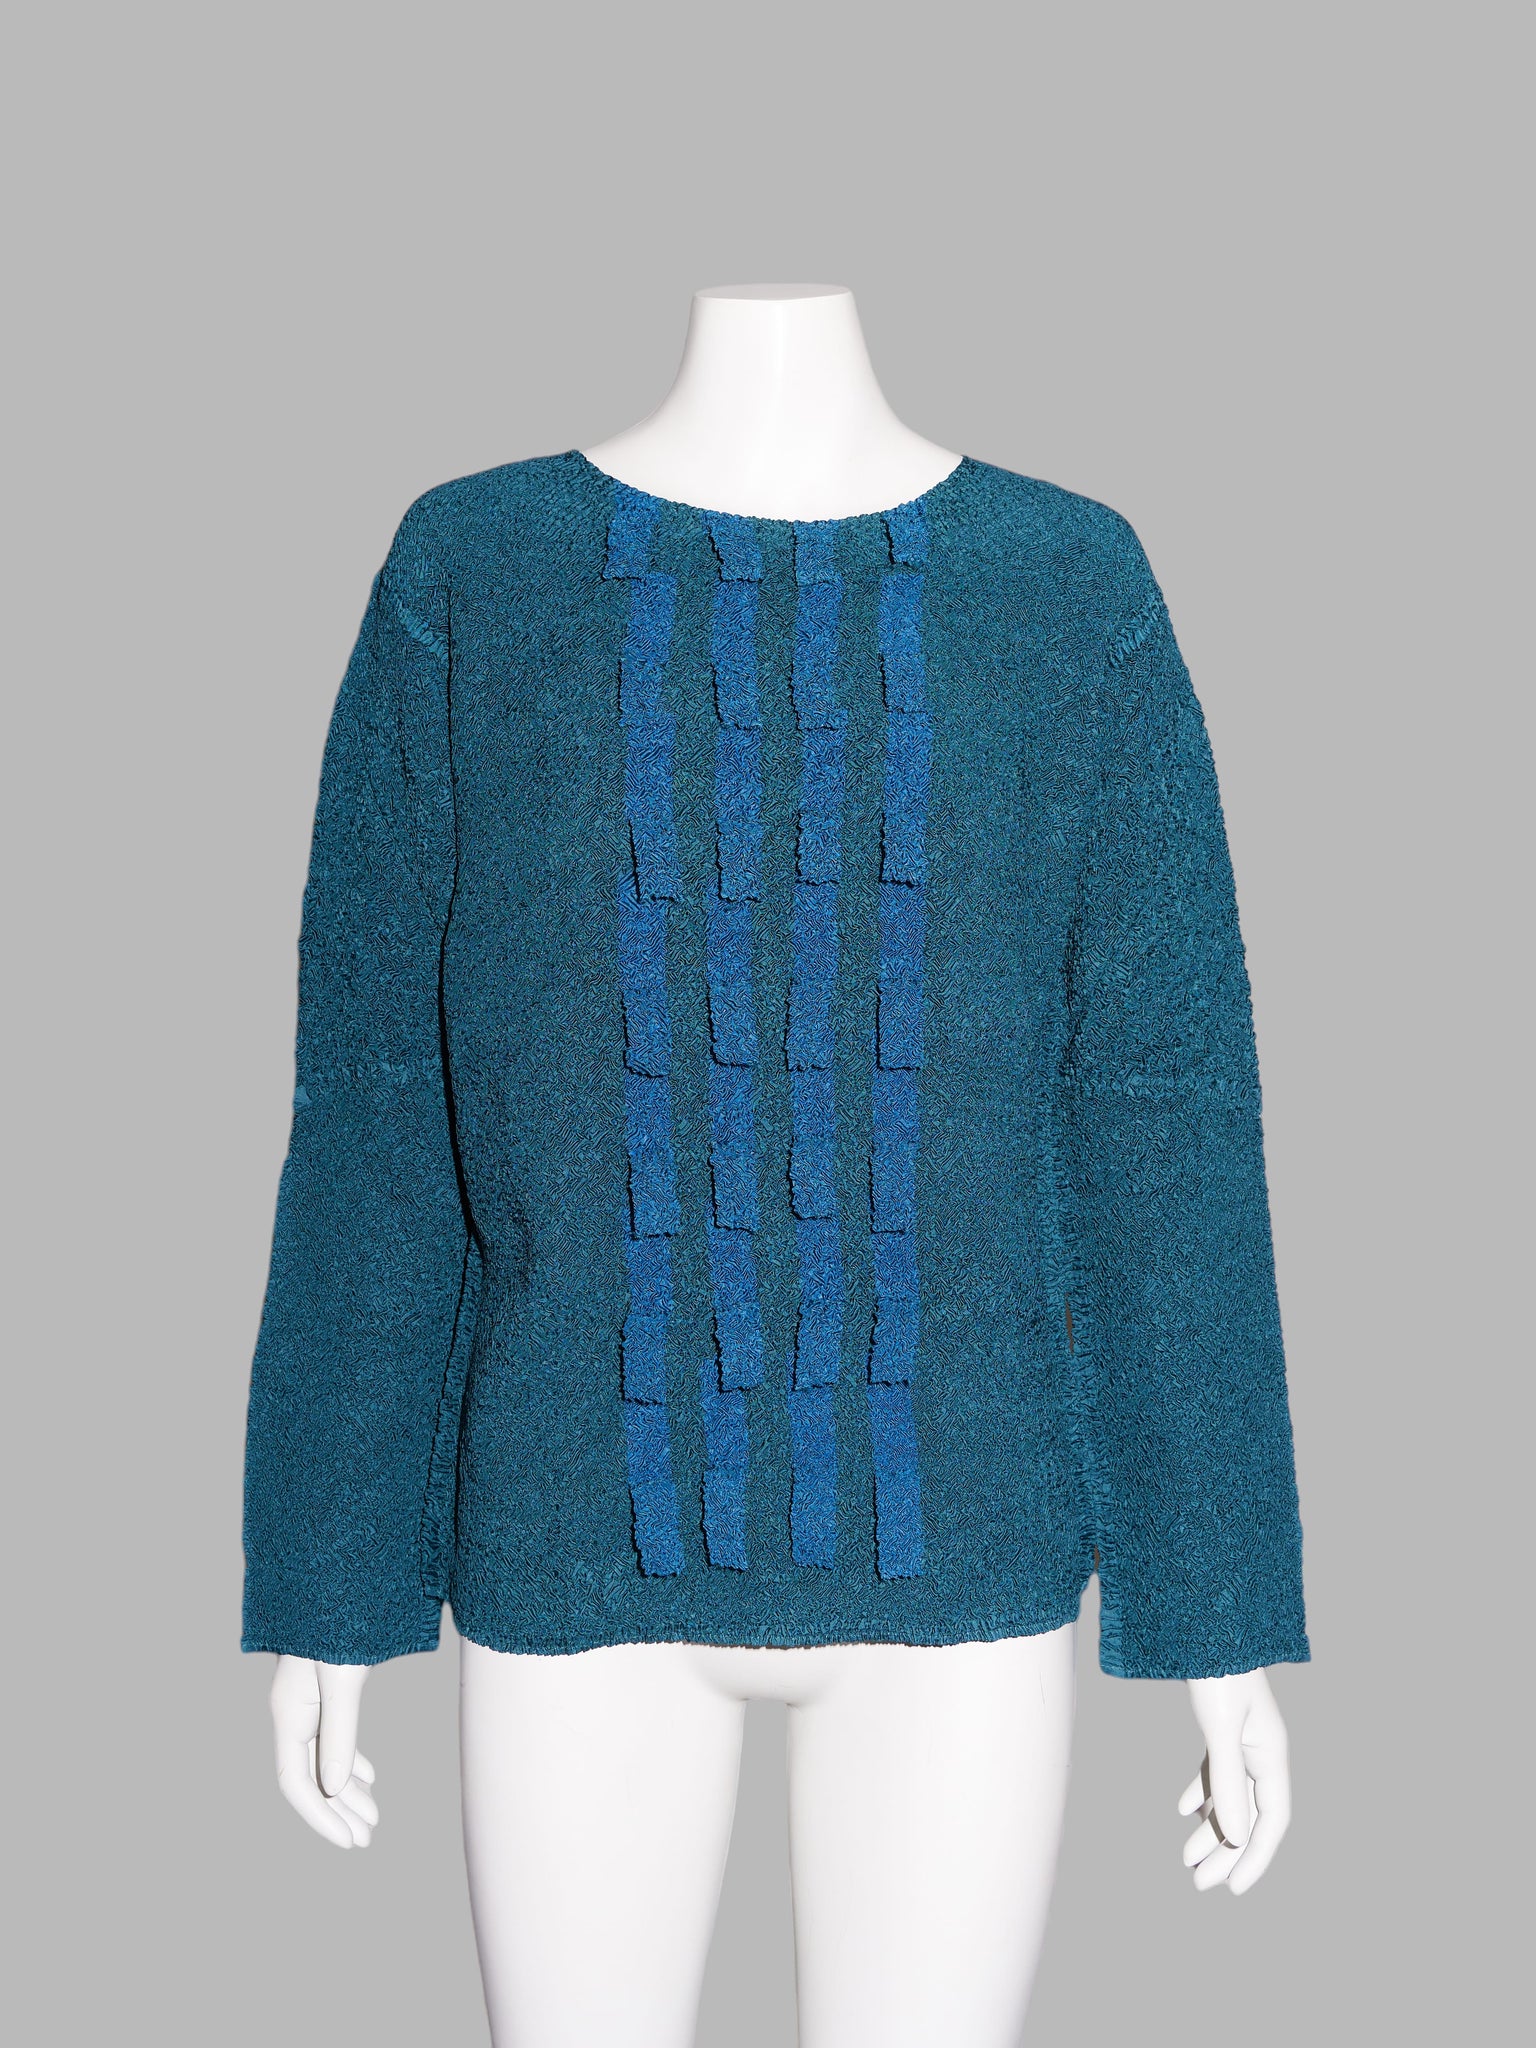 Wrinqle Inoue Pleats teal wrinkled poly long sleeve top with 3D layered strips